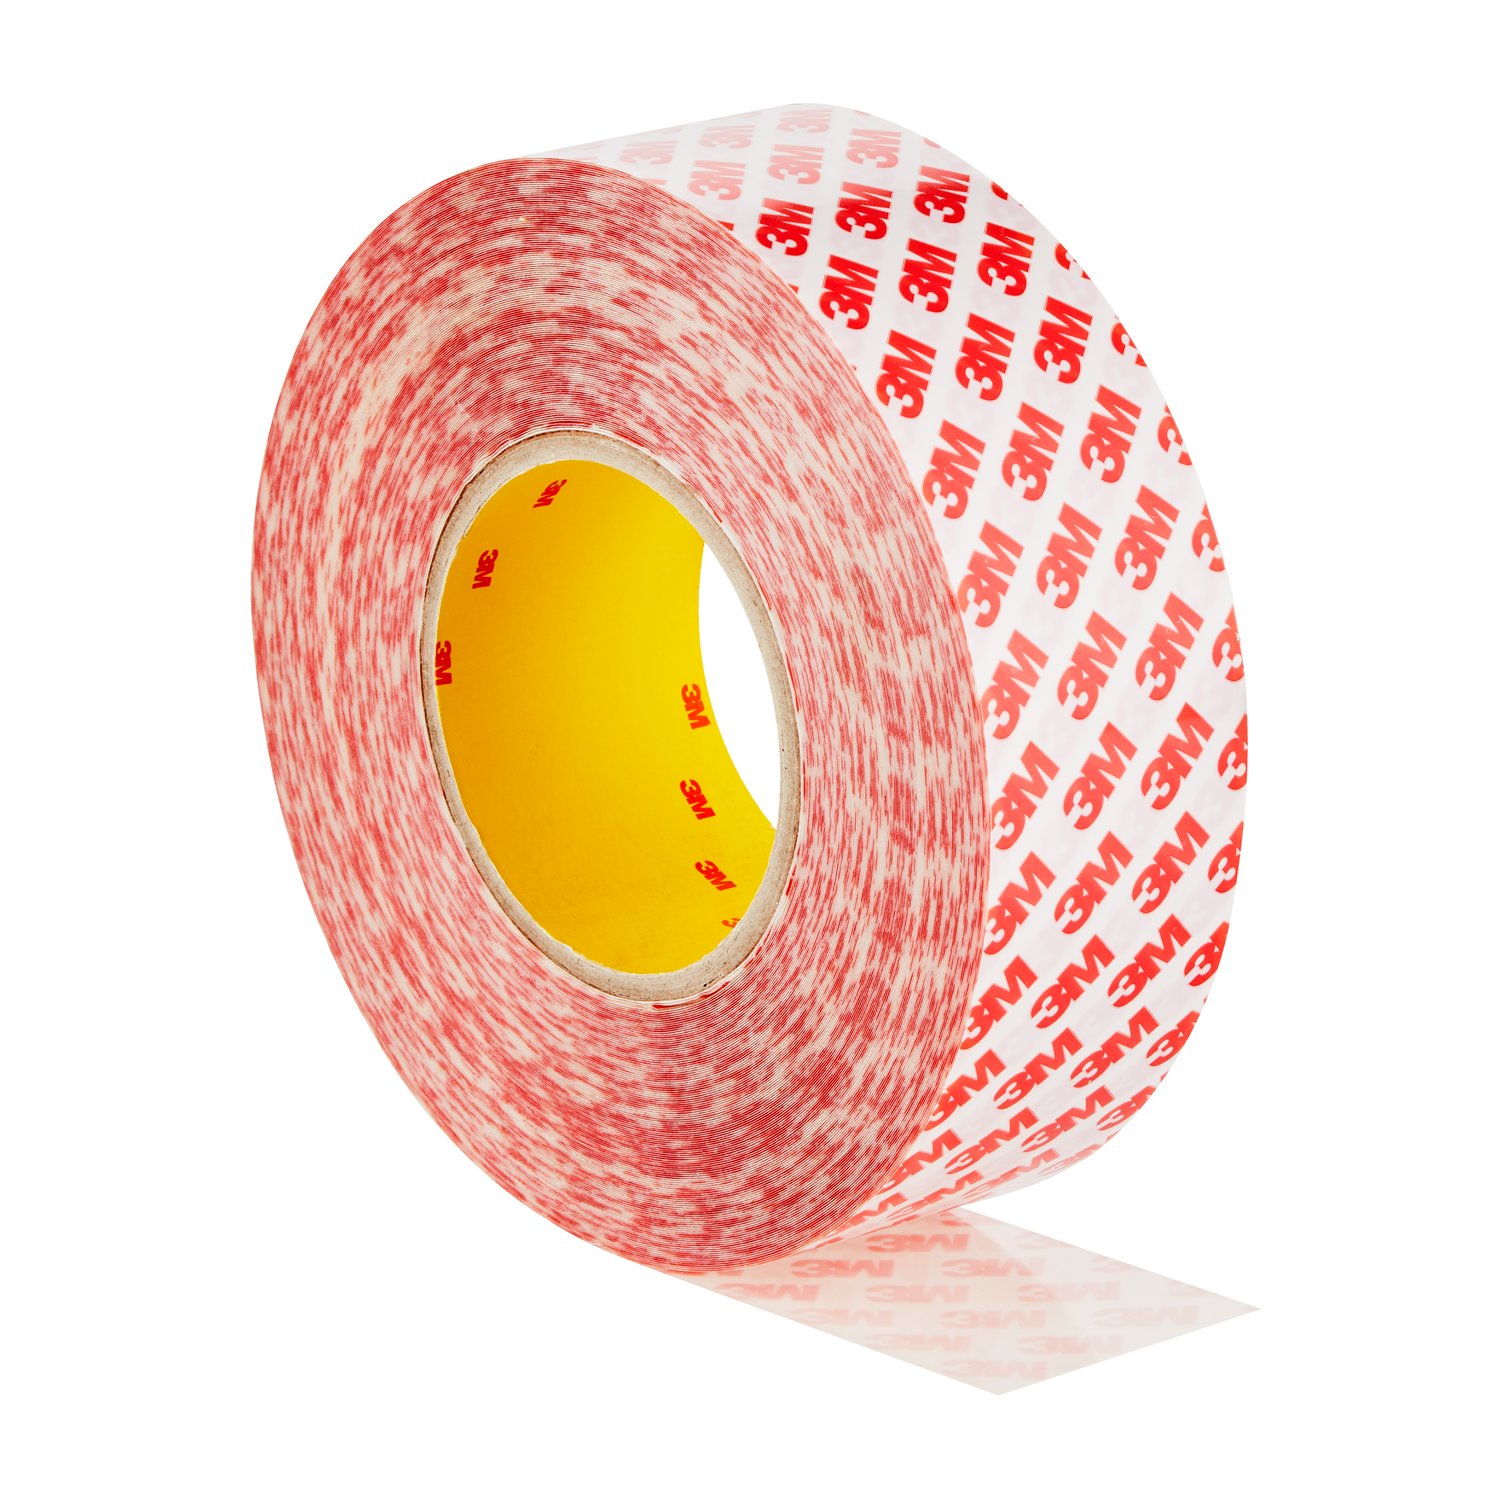 7100243950 - 3M Double Coated Tape GPT-020F, Transparent, Level Wound, 12 mm x 3850 m, 1 Roll/Case